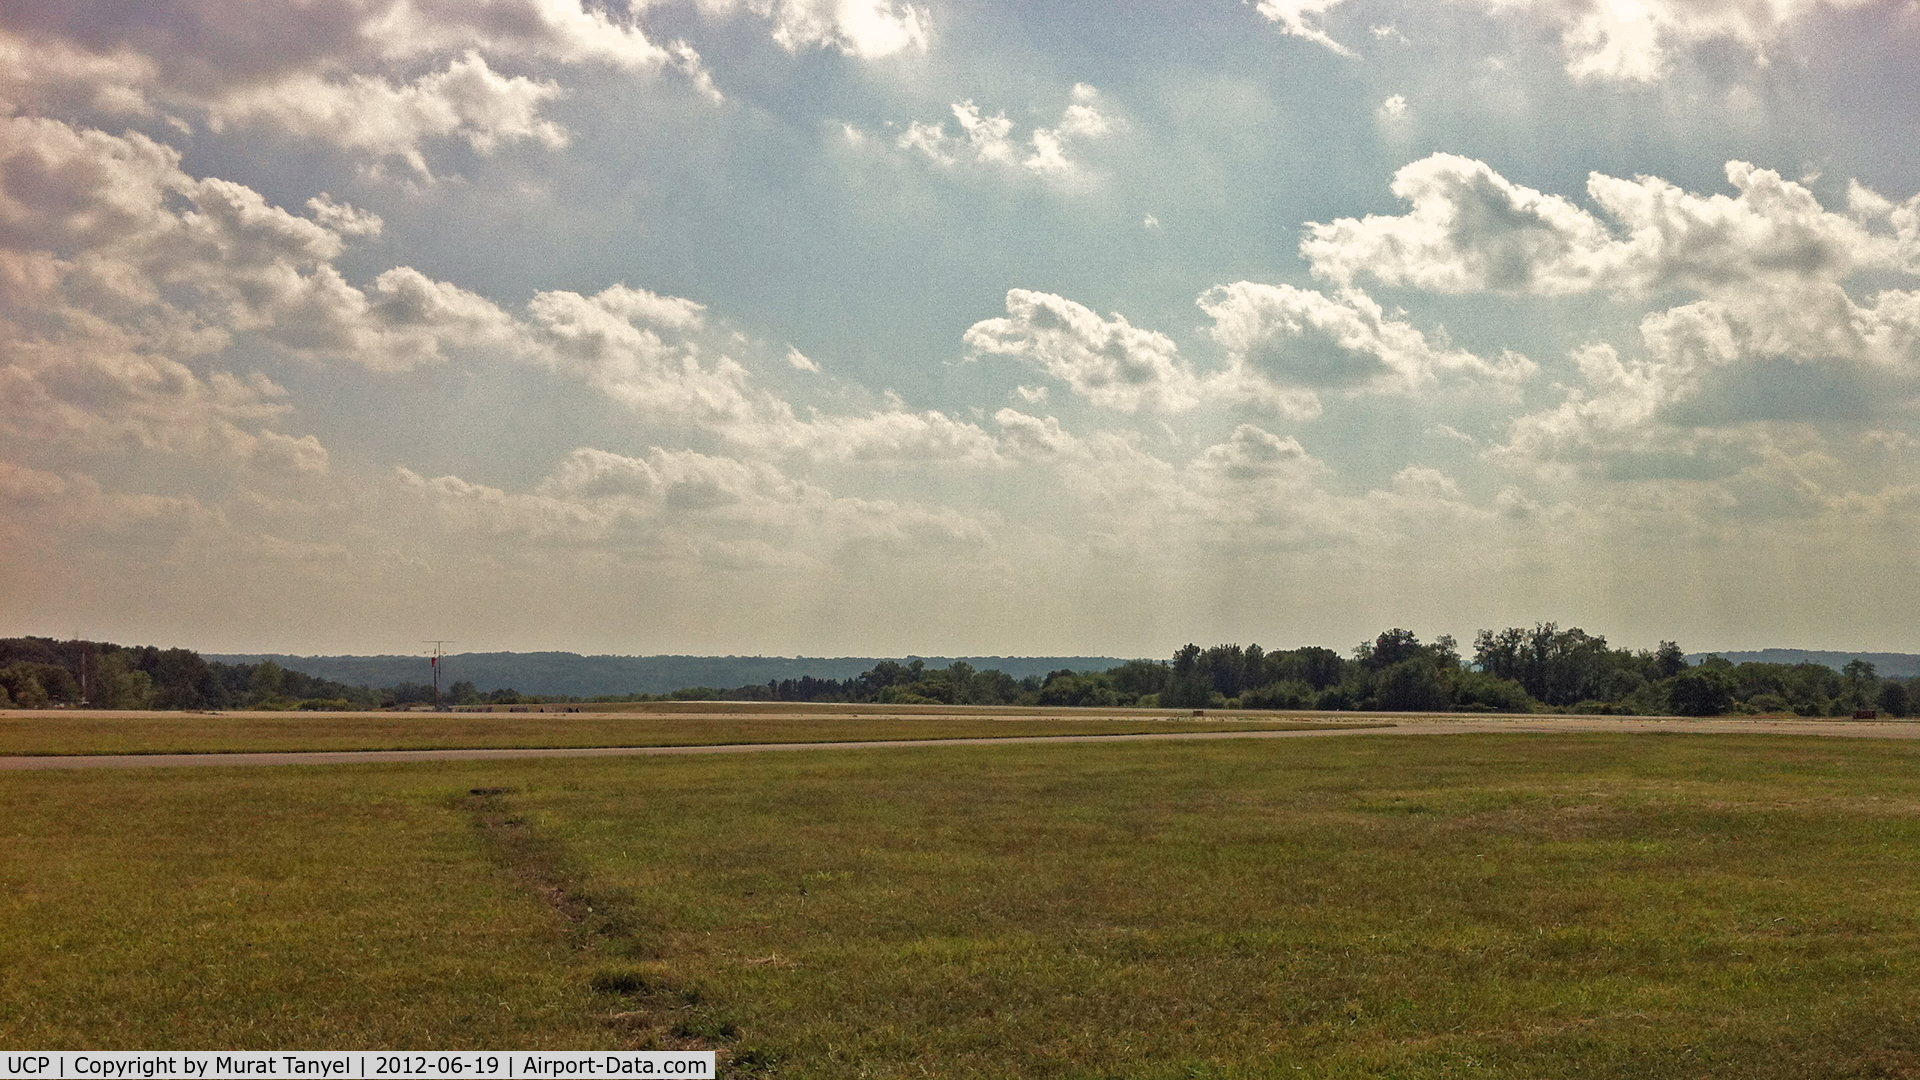 New Castle Municipal Airport (UCP) - Runway west of the main building